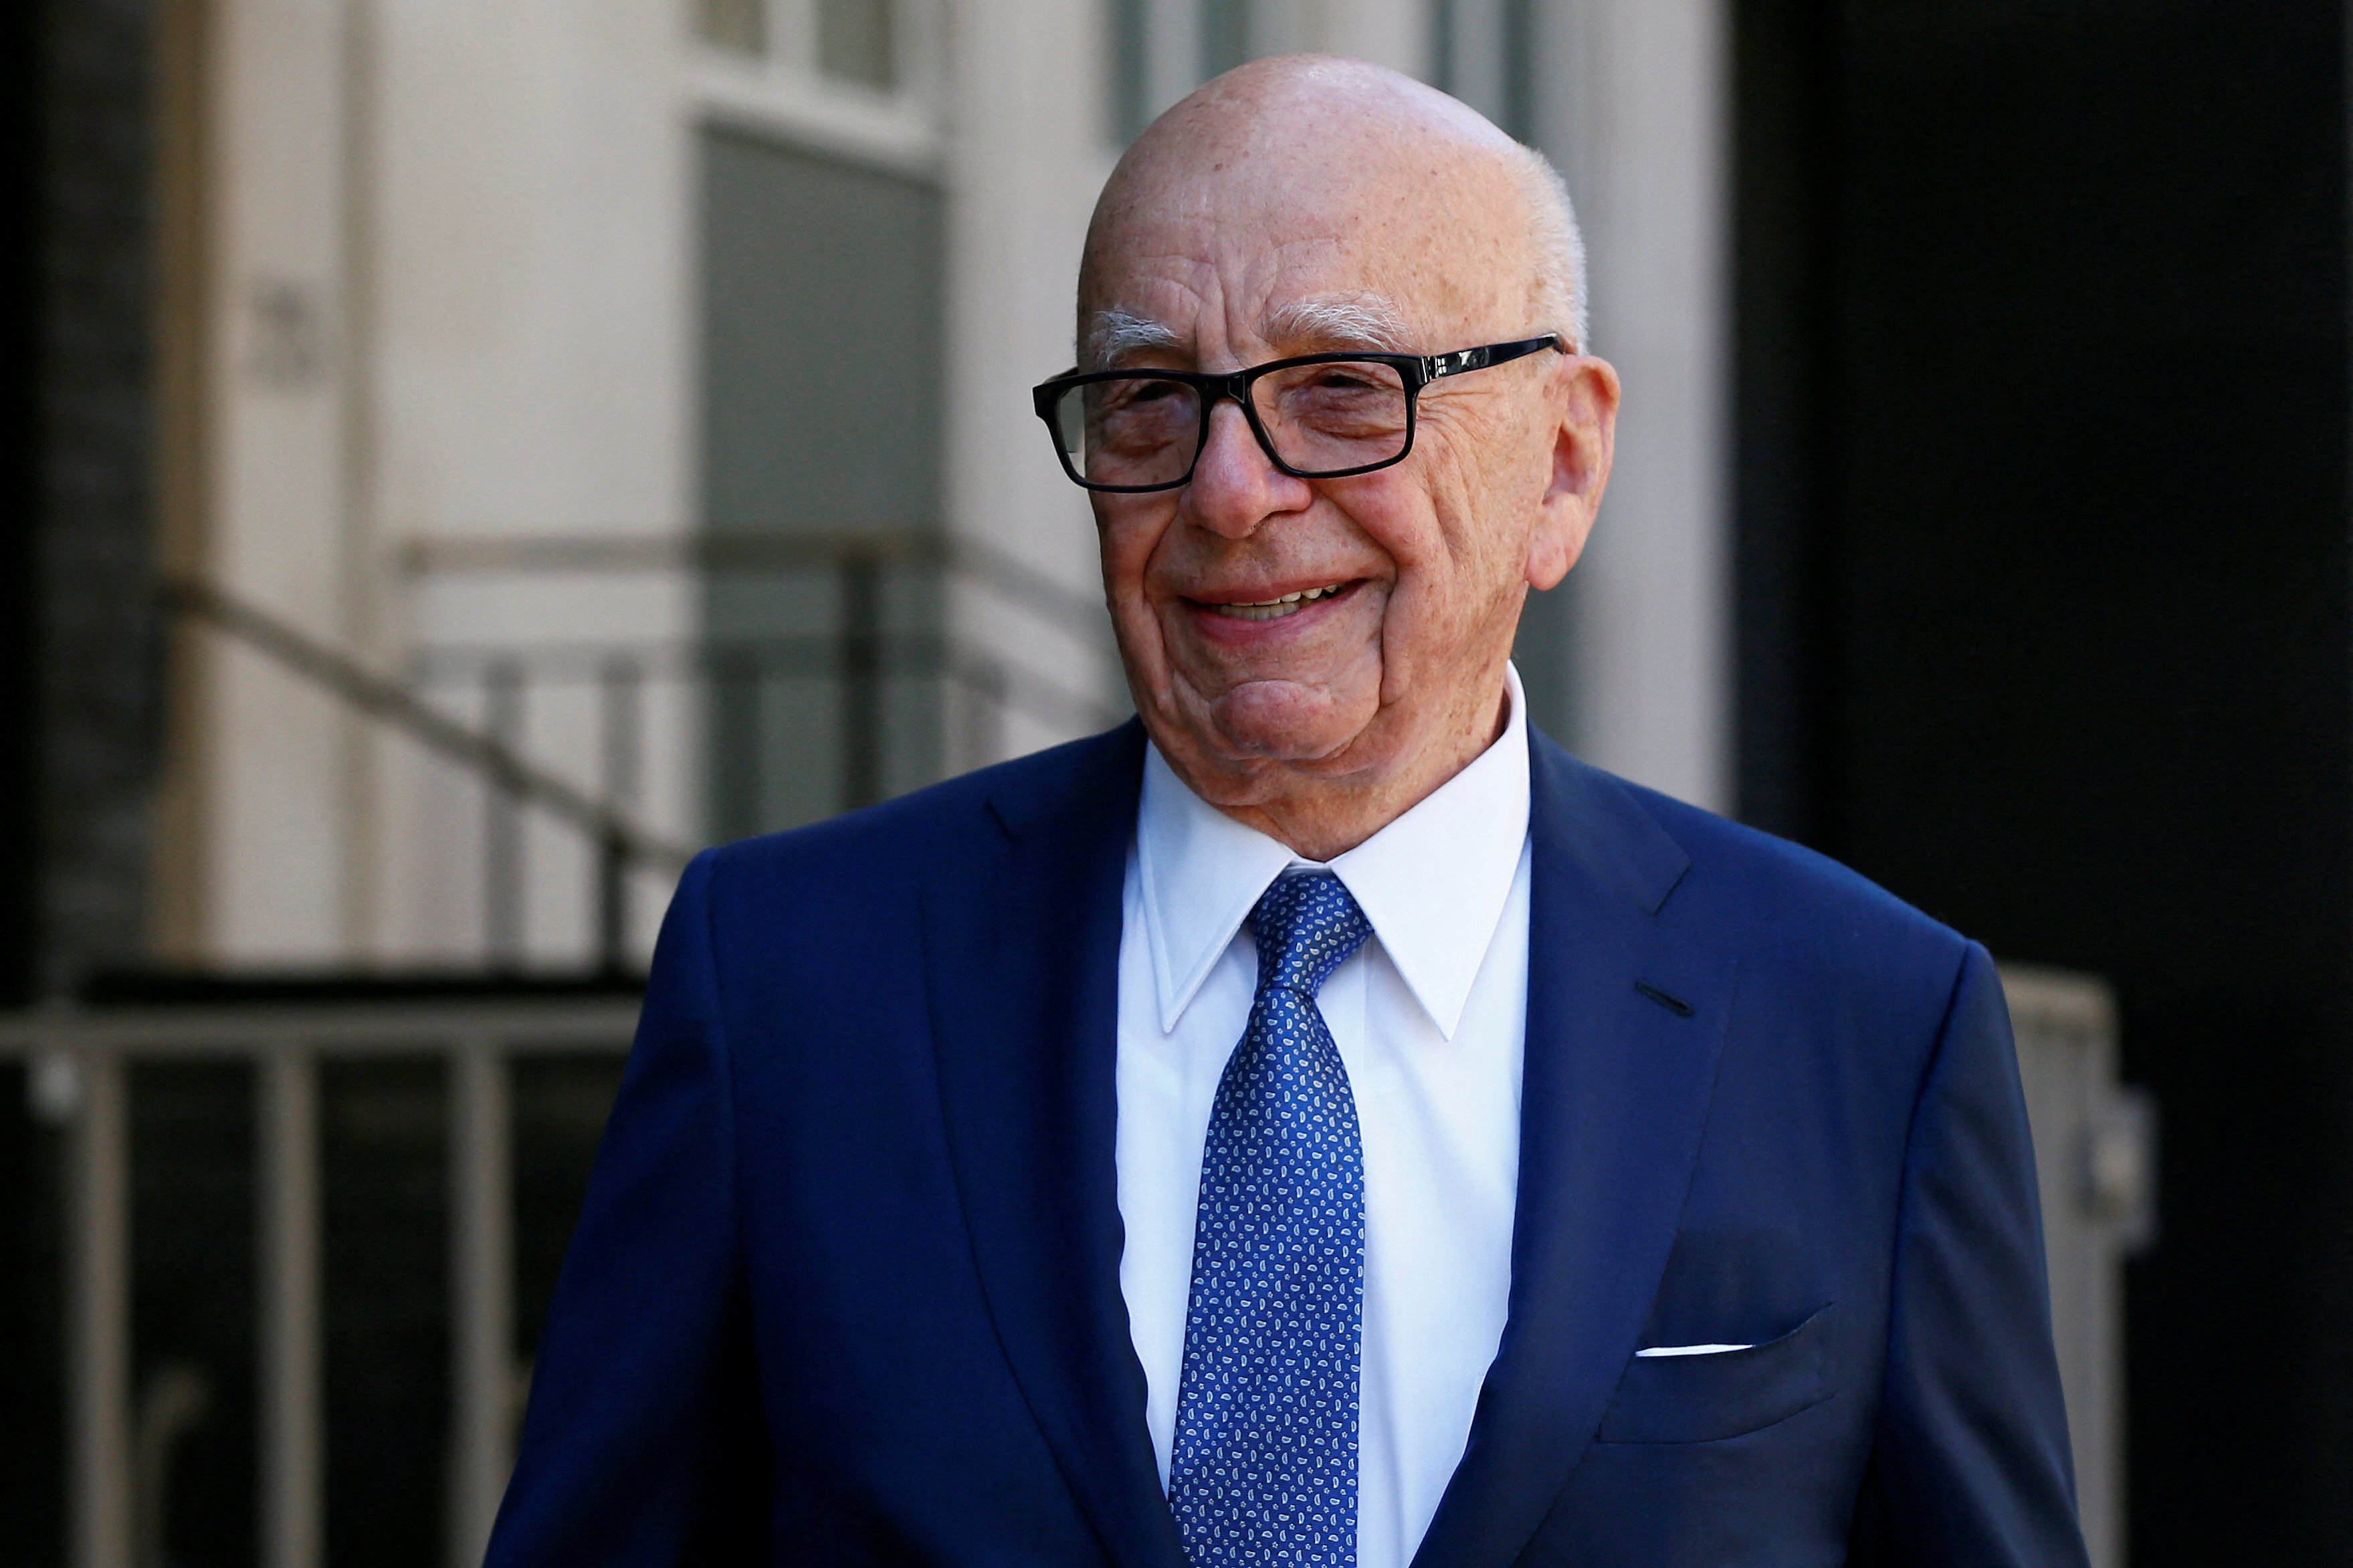 Rupert Murdoch, 92, is stepping down as chairman of two of his companies. Photo: Reuters